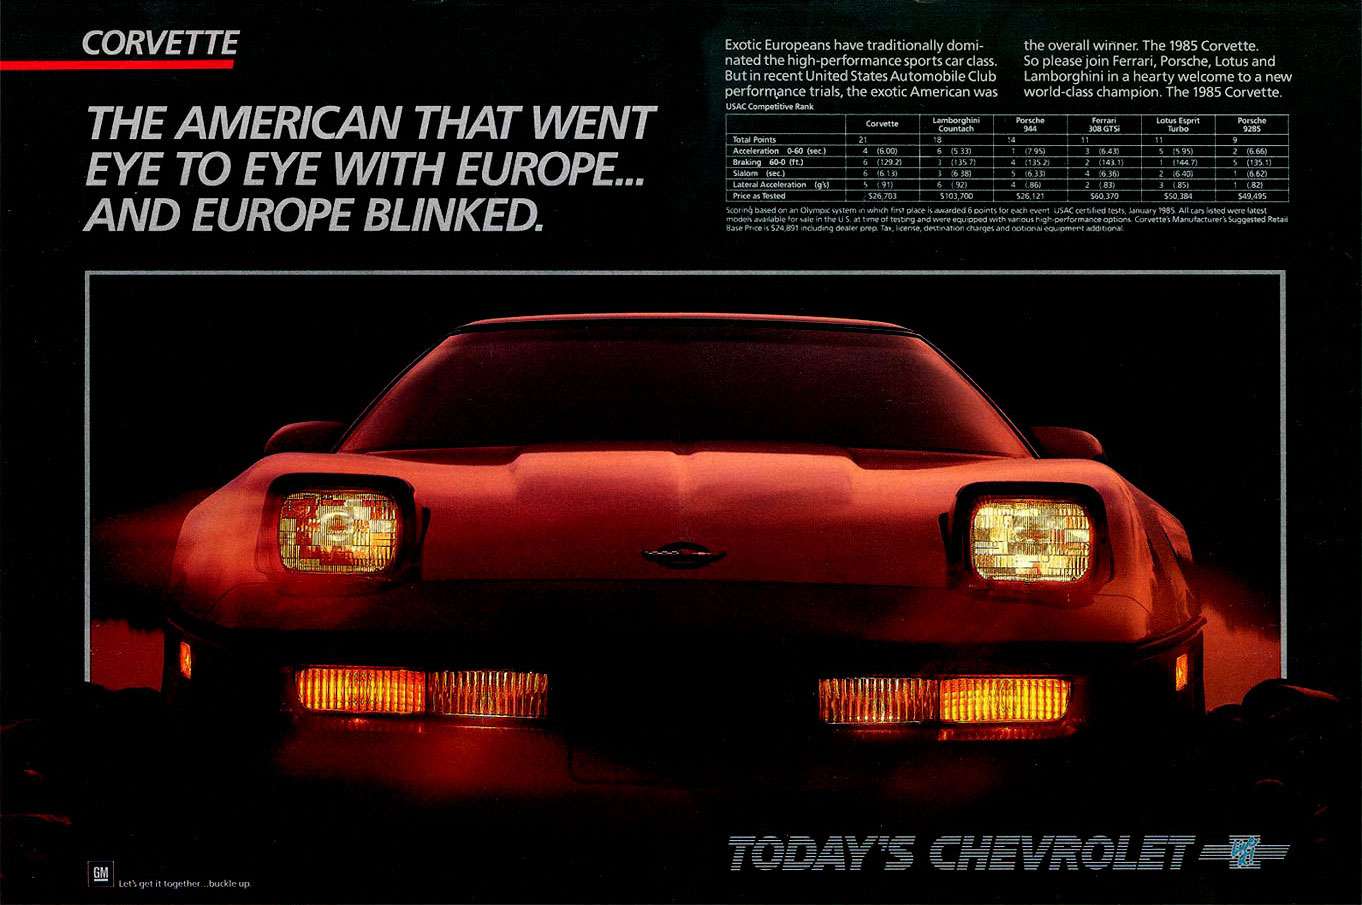 CORVETTE 
THE AMERICAN THAT WENT EYE TO EYE WITH EUROPE... AND EUROPE BLINKED. 
Exotic Europeans have traditionally domi-nated the high-performance sports car dass. But in recent United States Automobile Club performance trials, the exotic American was USACCompleive Ronk 
the overall winner. The 1985 Corvette. So please join Ferrari, Porsche, Lotus and Lamborghini in a hearty welcome to a new world-class champion. The 1985 Corvette.